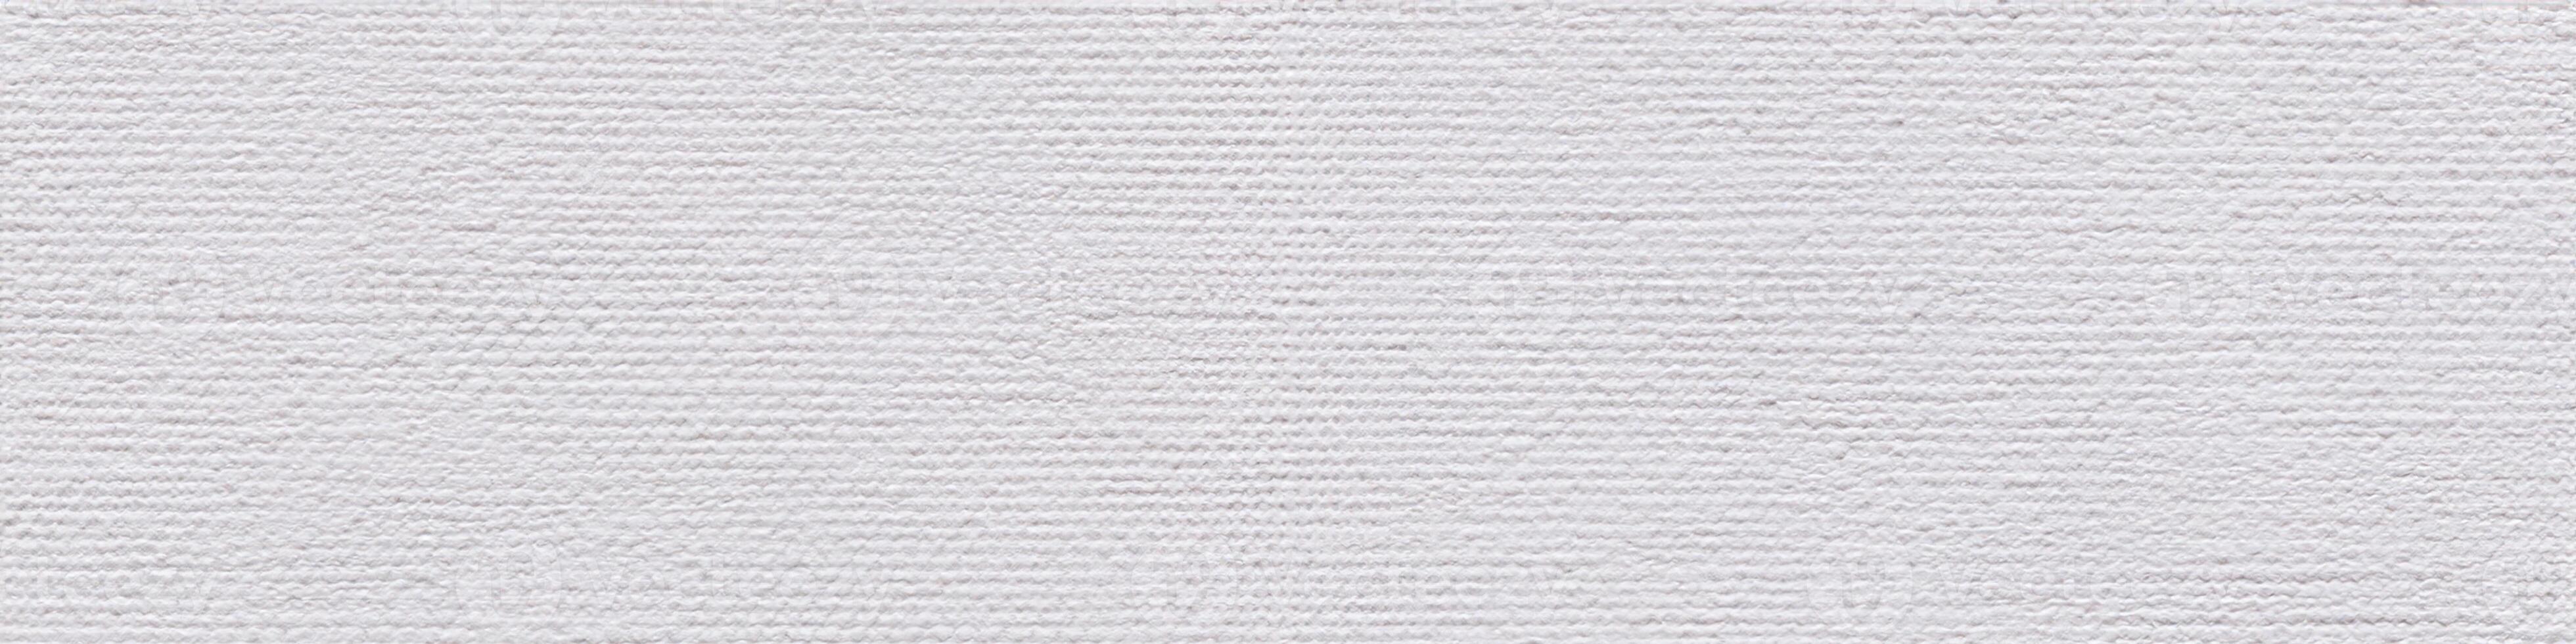 Classic white acrylic canvas background as part of your creative work. Seamless panoramic texture. photo